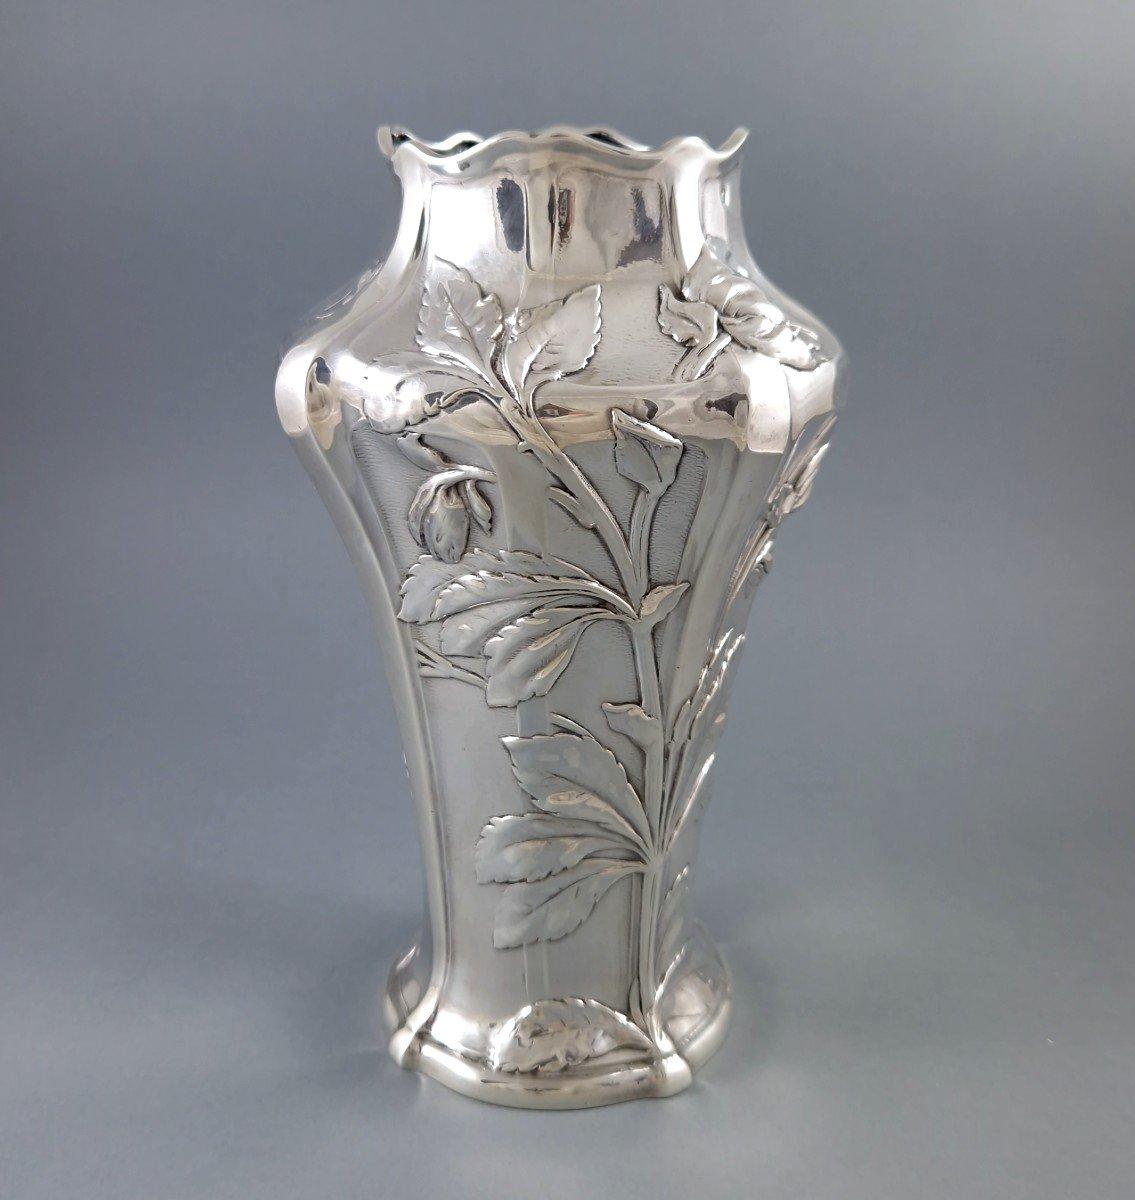 Nice Sterling silver vase from the Art Nouveau period 

Decorated with leafy and flowering branches 

Hallmarked Minerva hallmark 1st title for 950/1000 purity silver
Silversmith: Gustave Leroy 

Height: 19.5 cm 
Weight: 408 grams